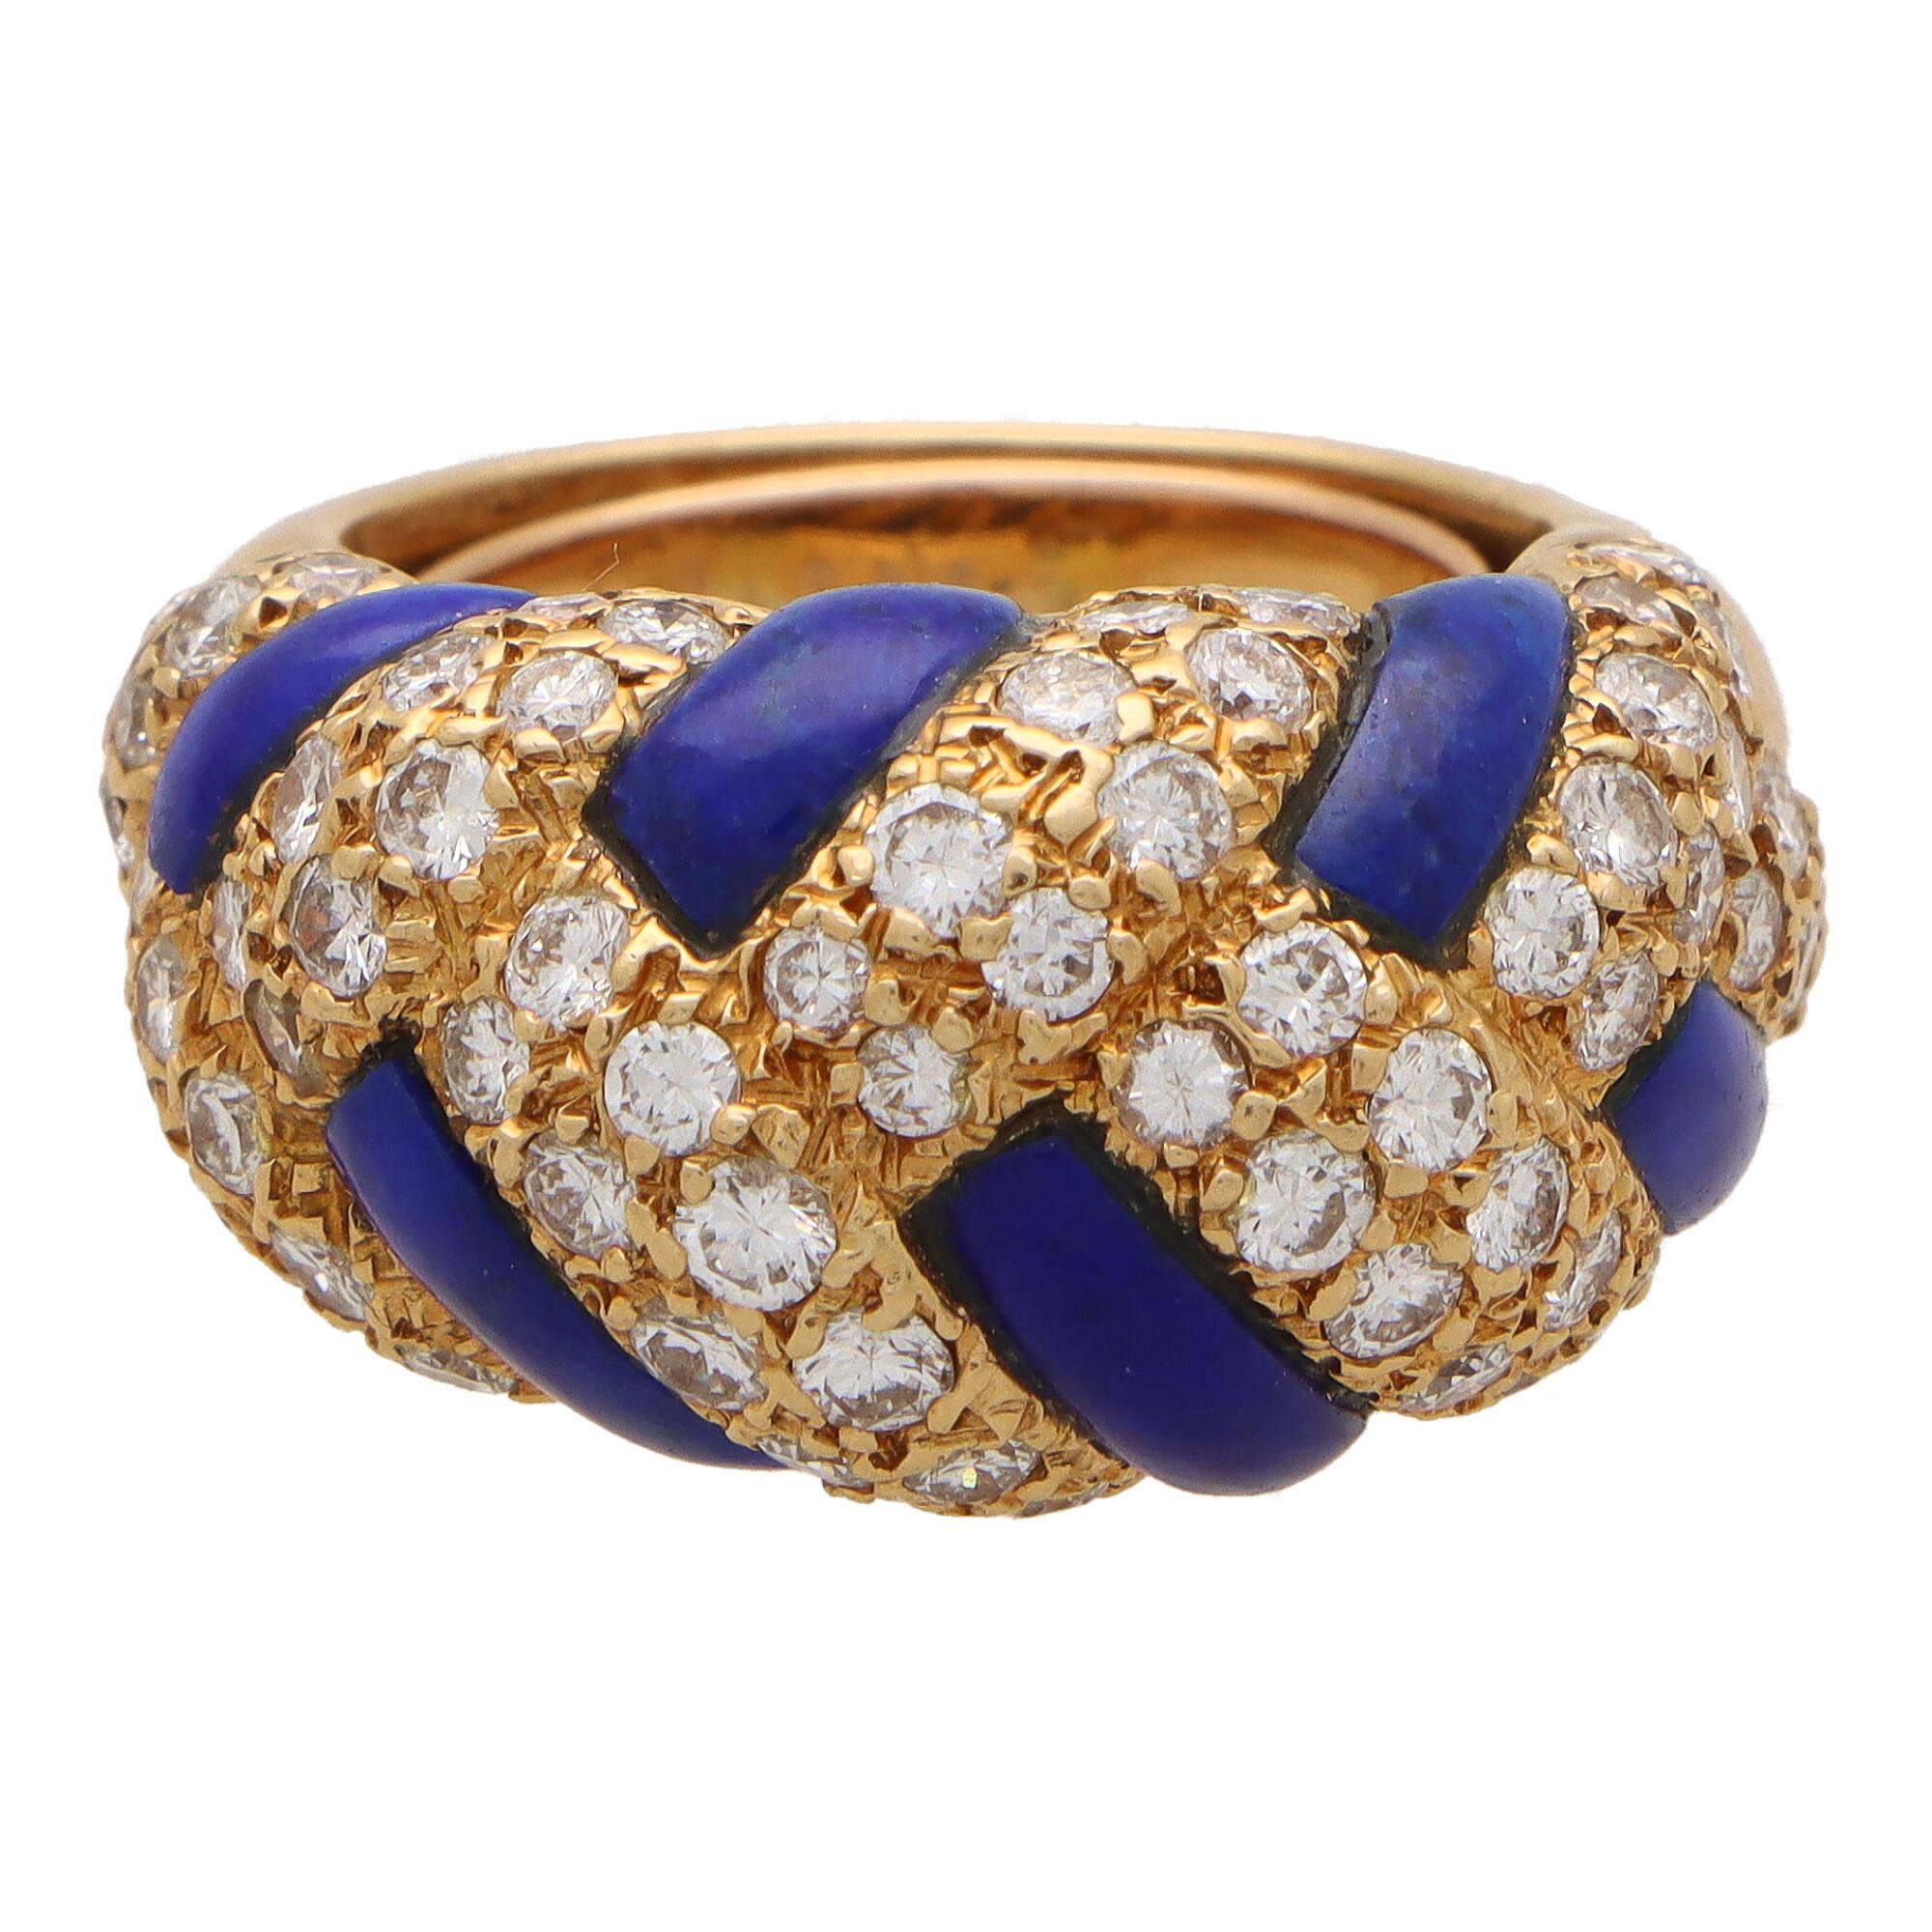  Vintage 1980's Van Cleef & Arpels Lapis and Diamond Dress Ring In Excellent Condition For Sale In London, GB